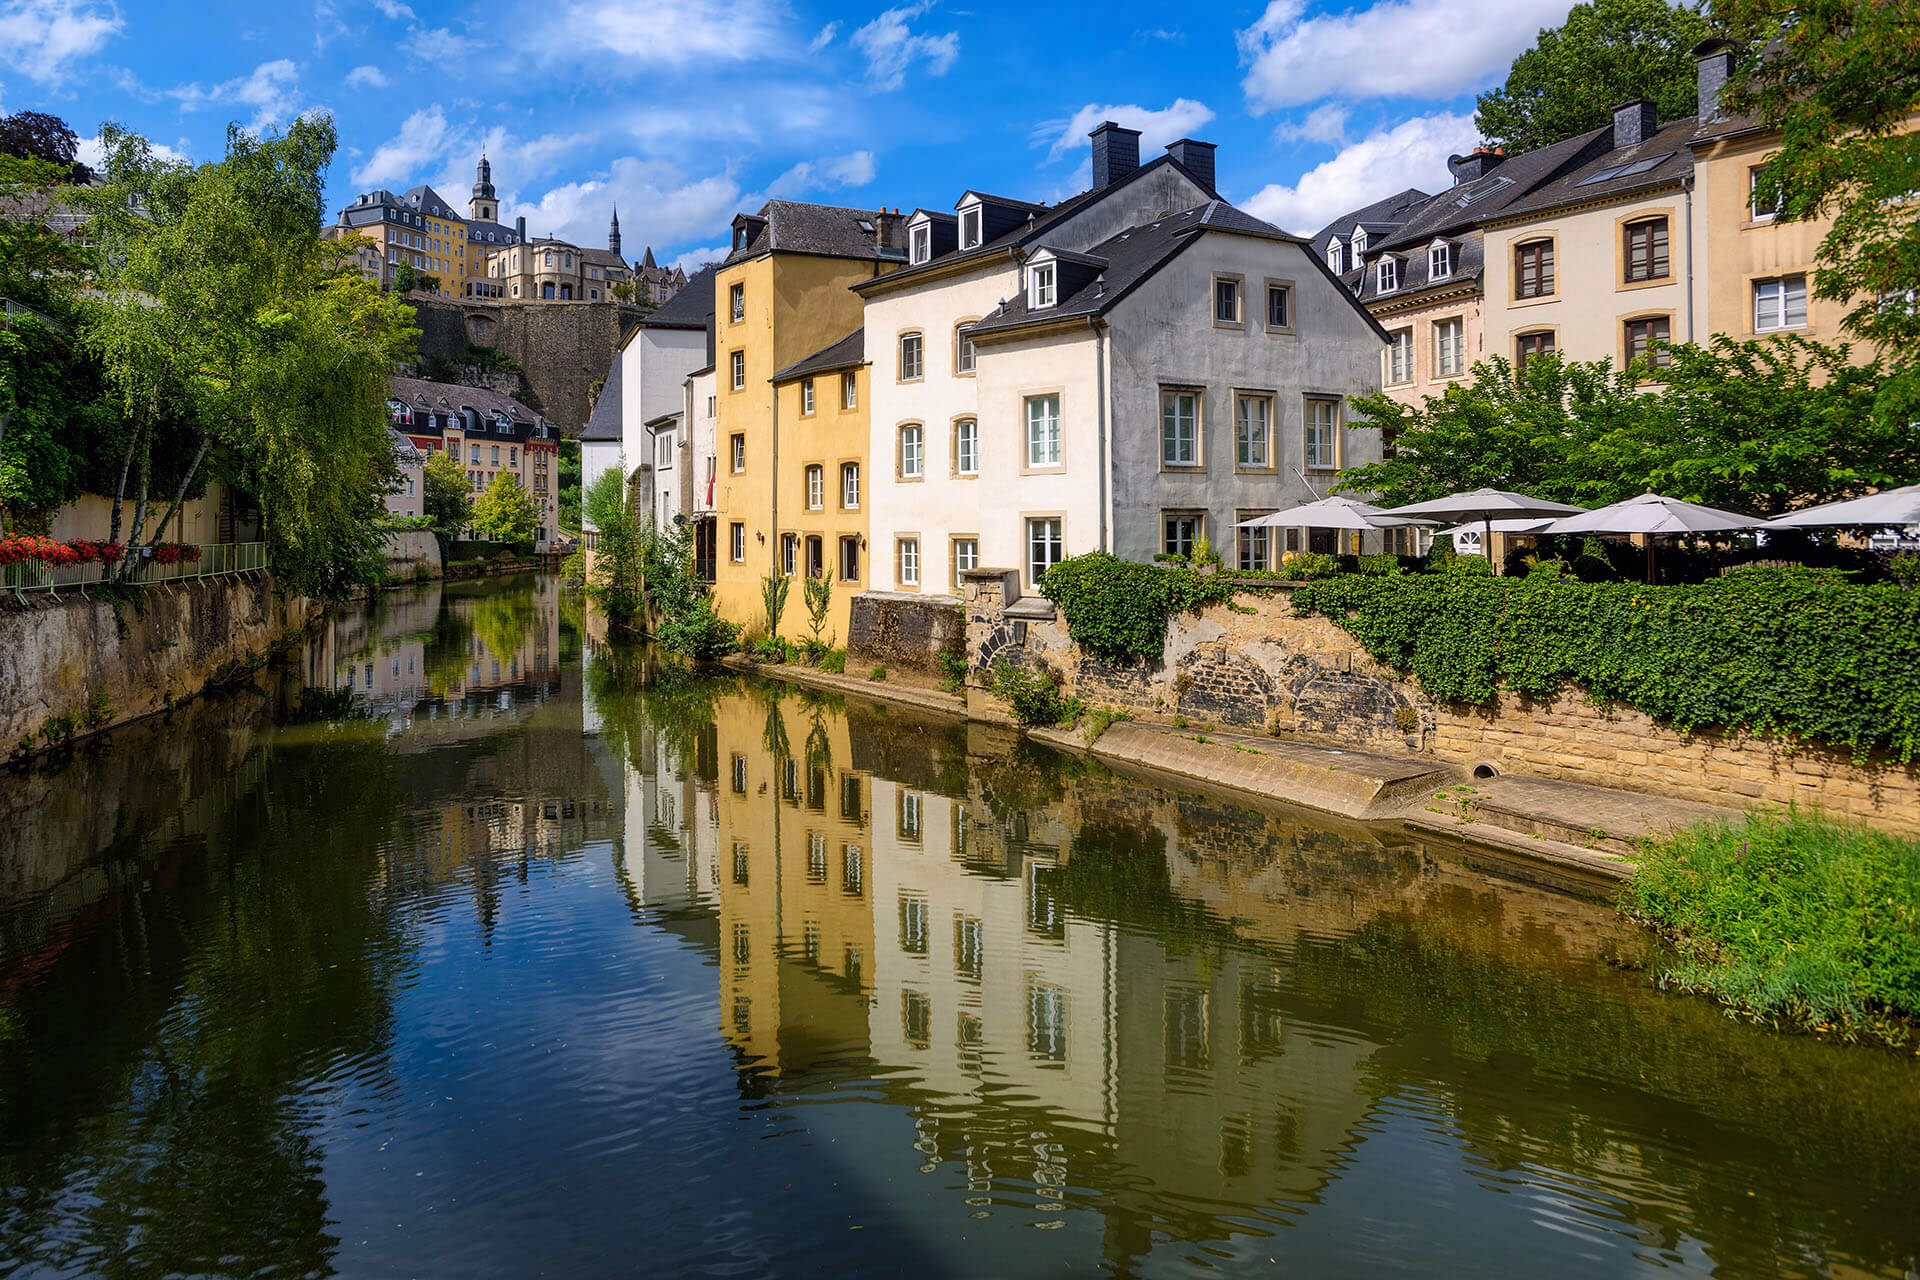 Luxembourg: Work and Residence Permit Processing Delays